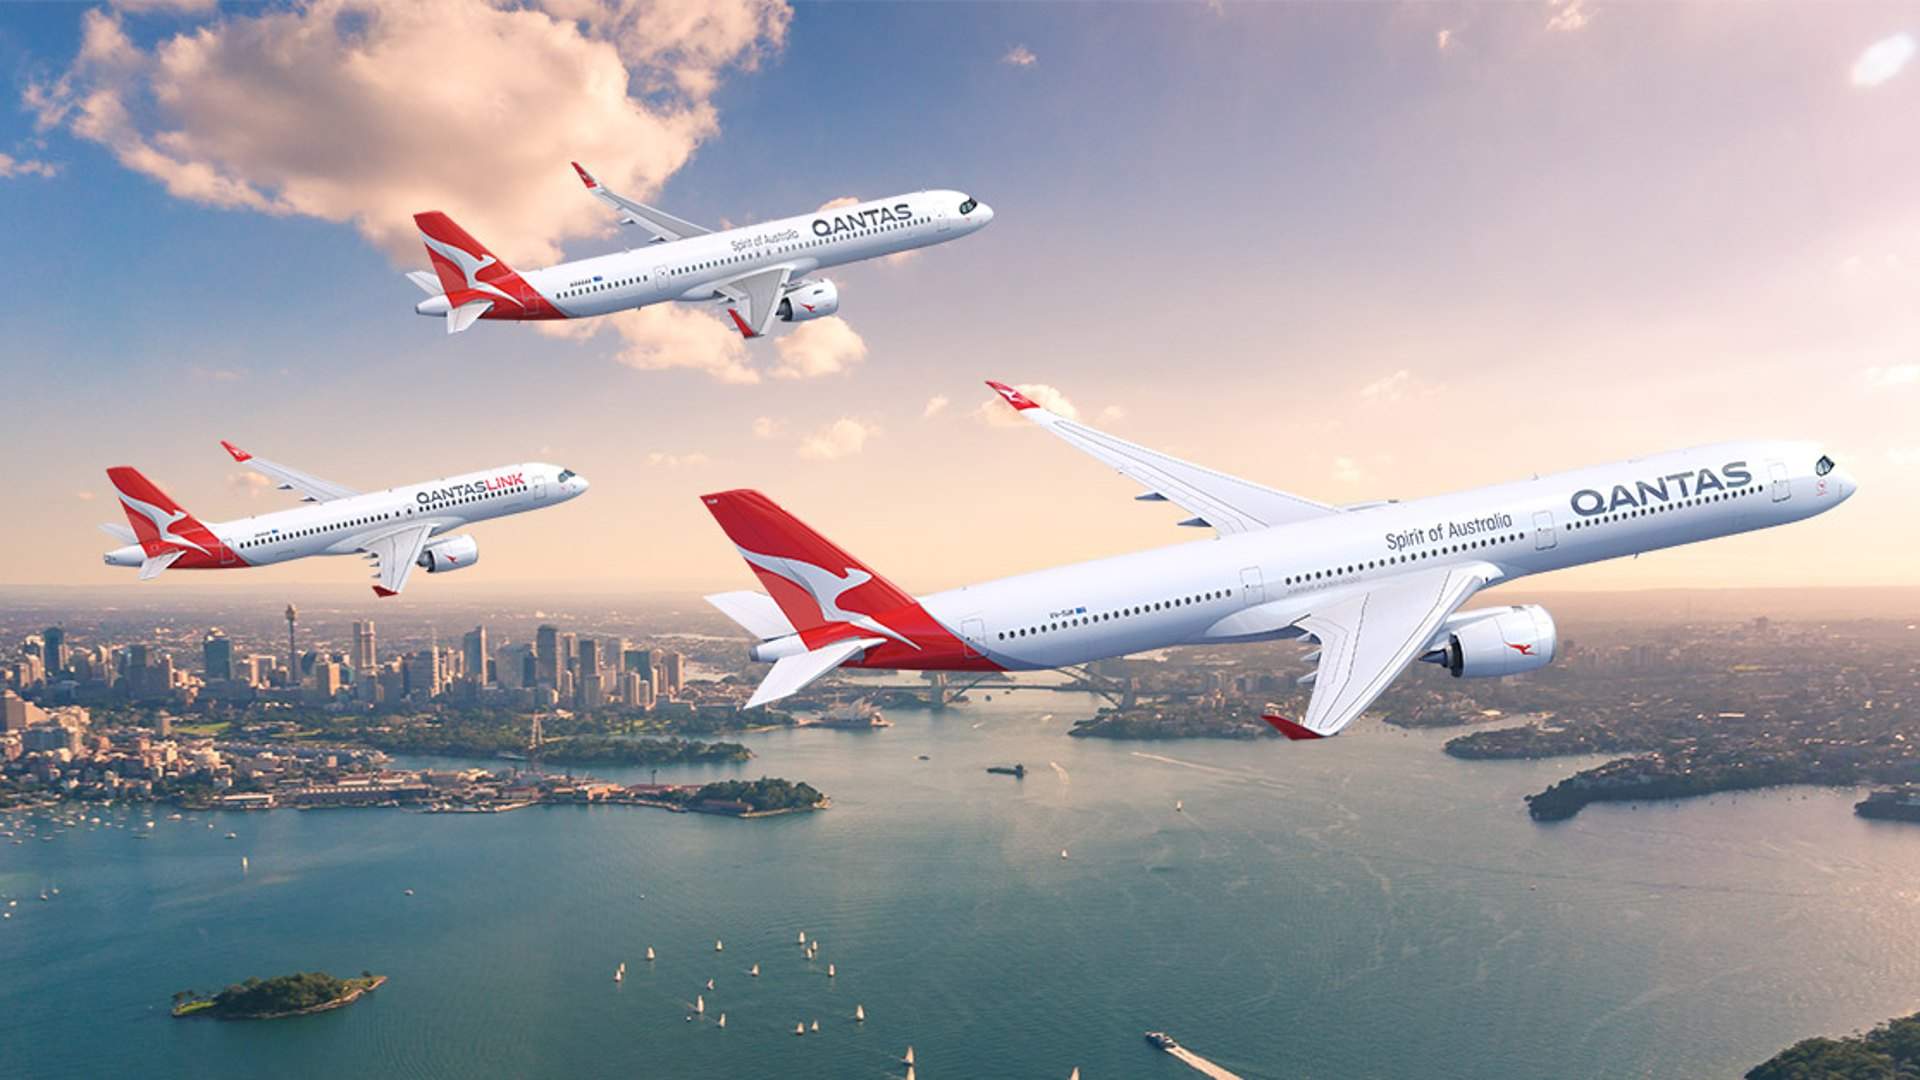 Qantas Will Fly Direct From the East Coast of Australia to London and New York from 2025